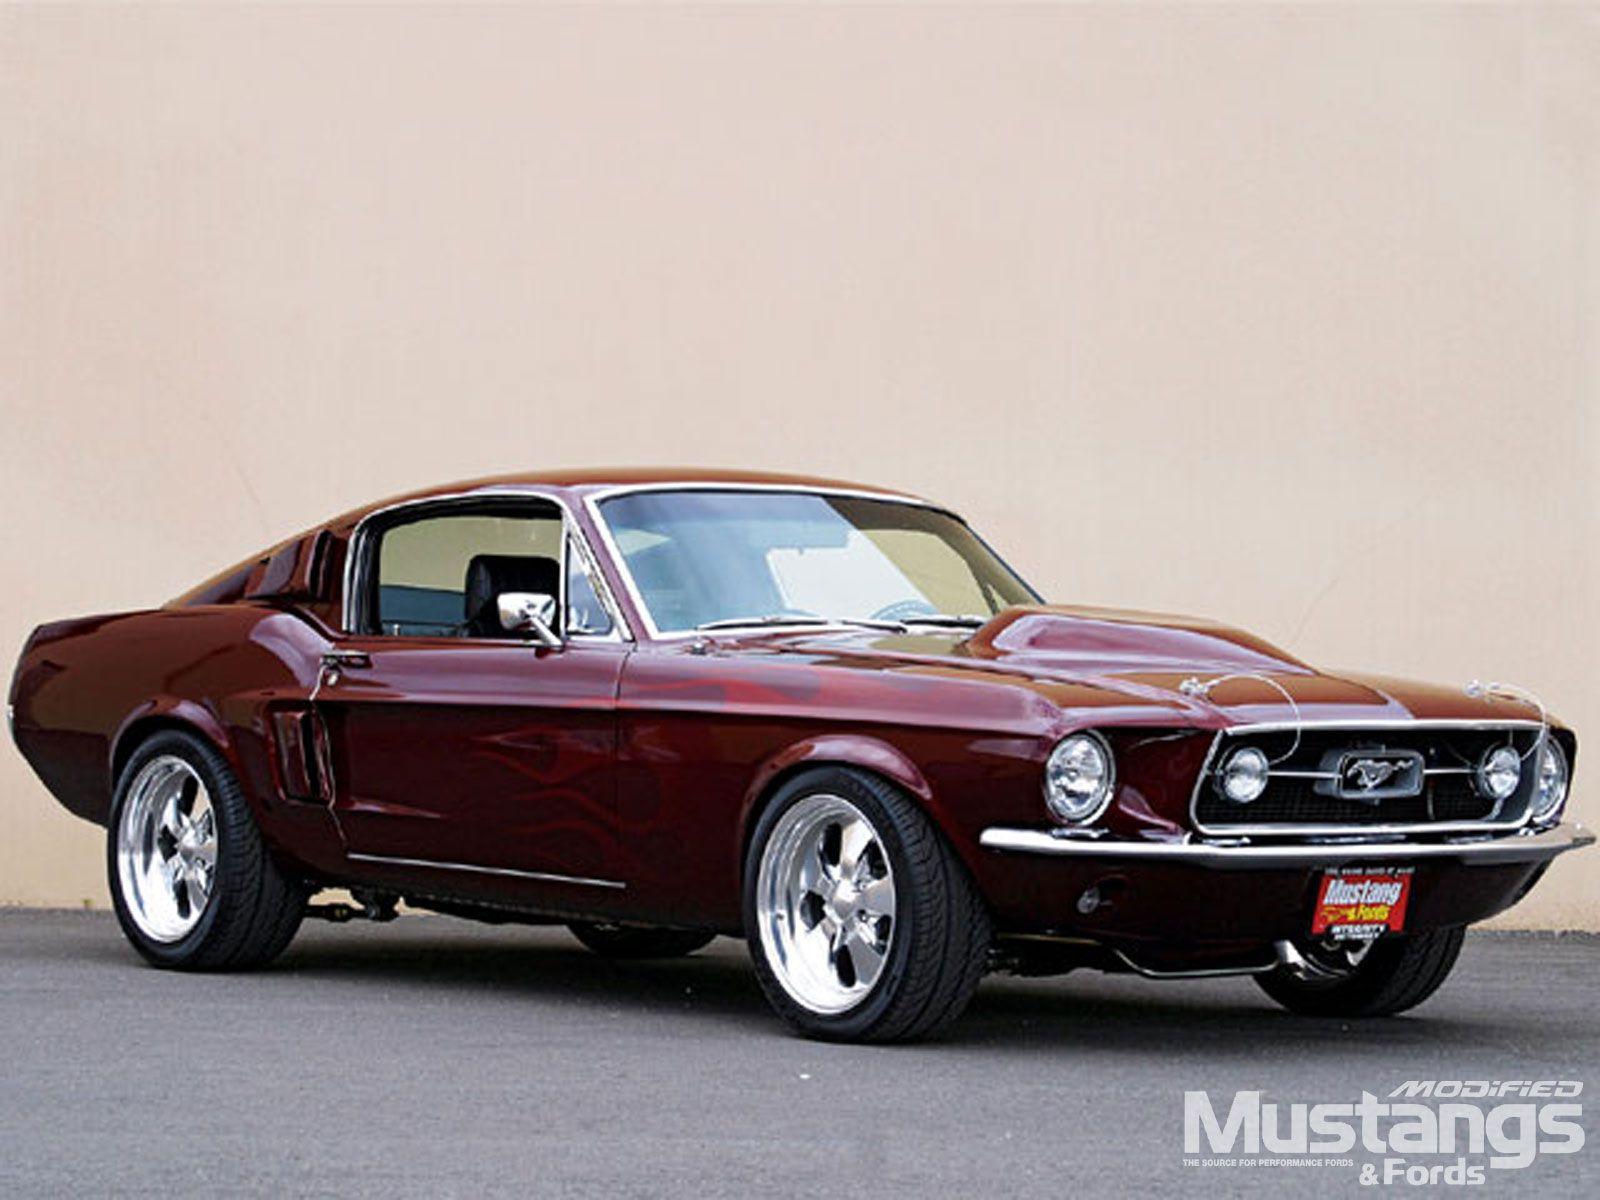 Ford Mustang Fastback wallpaper, Vehicles, HQ Ford Mustang Fastback